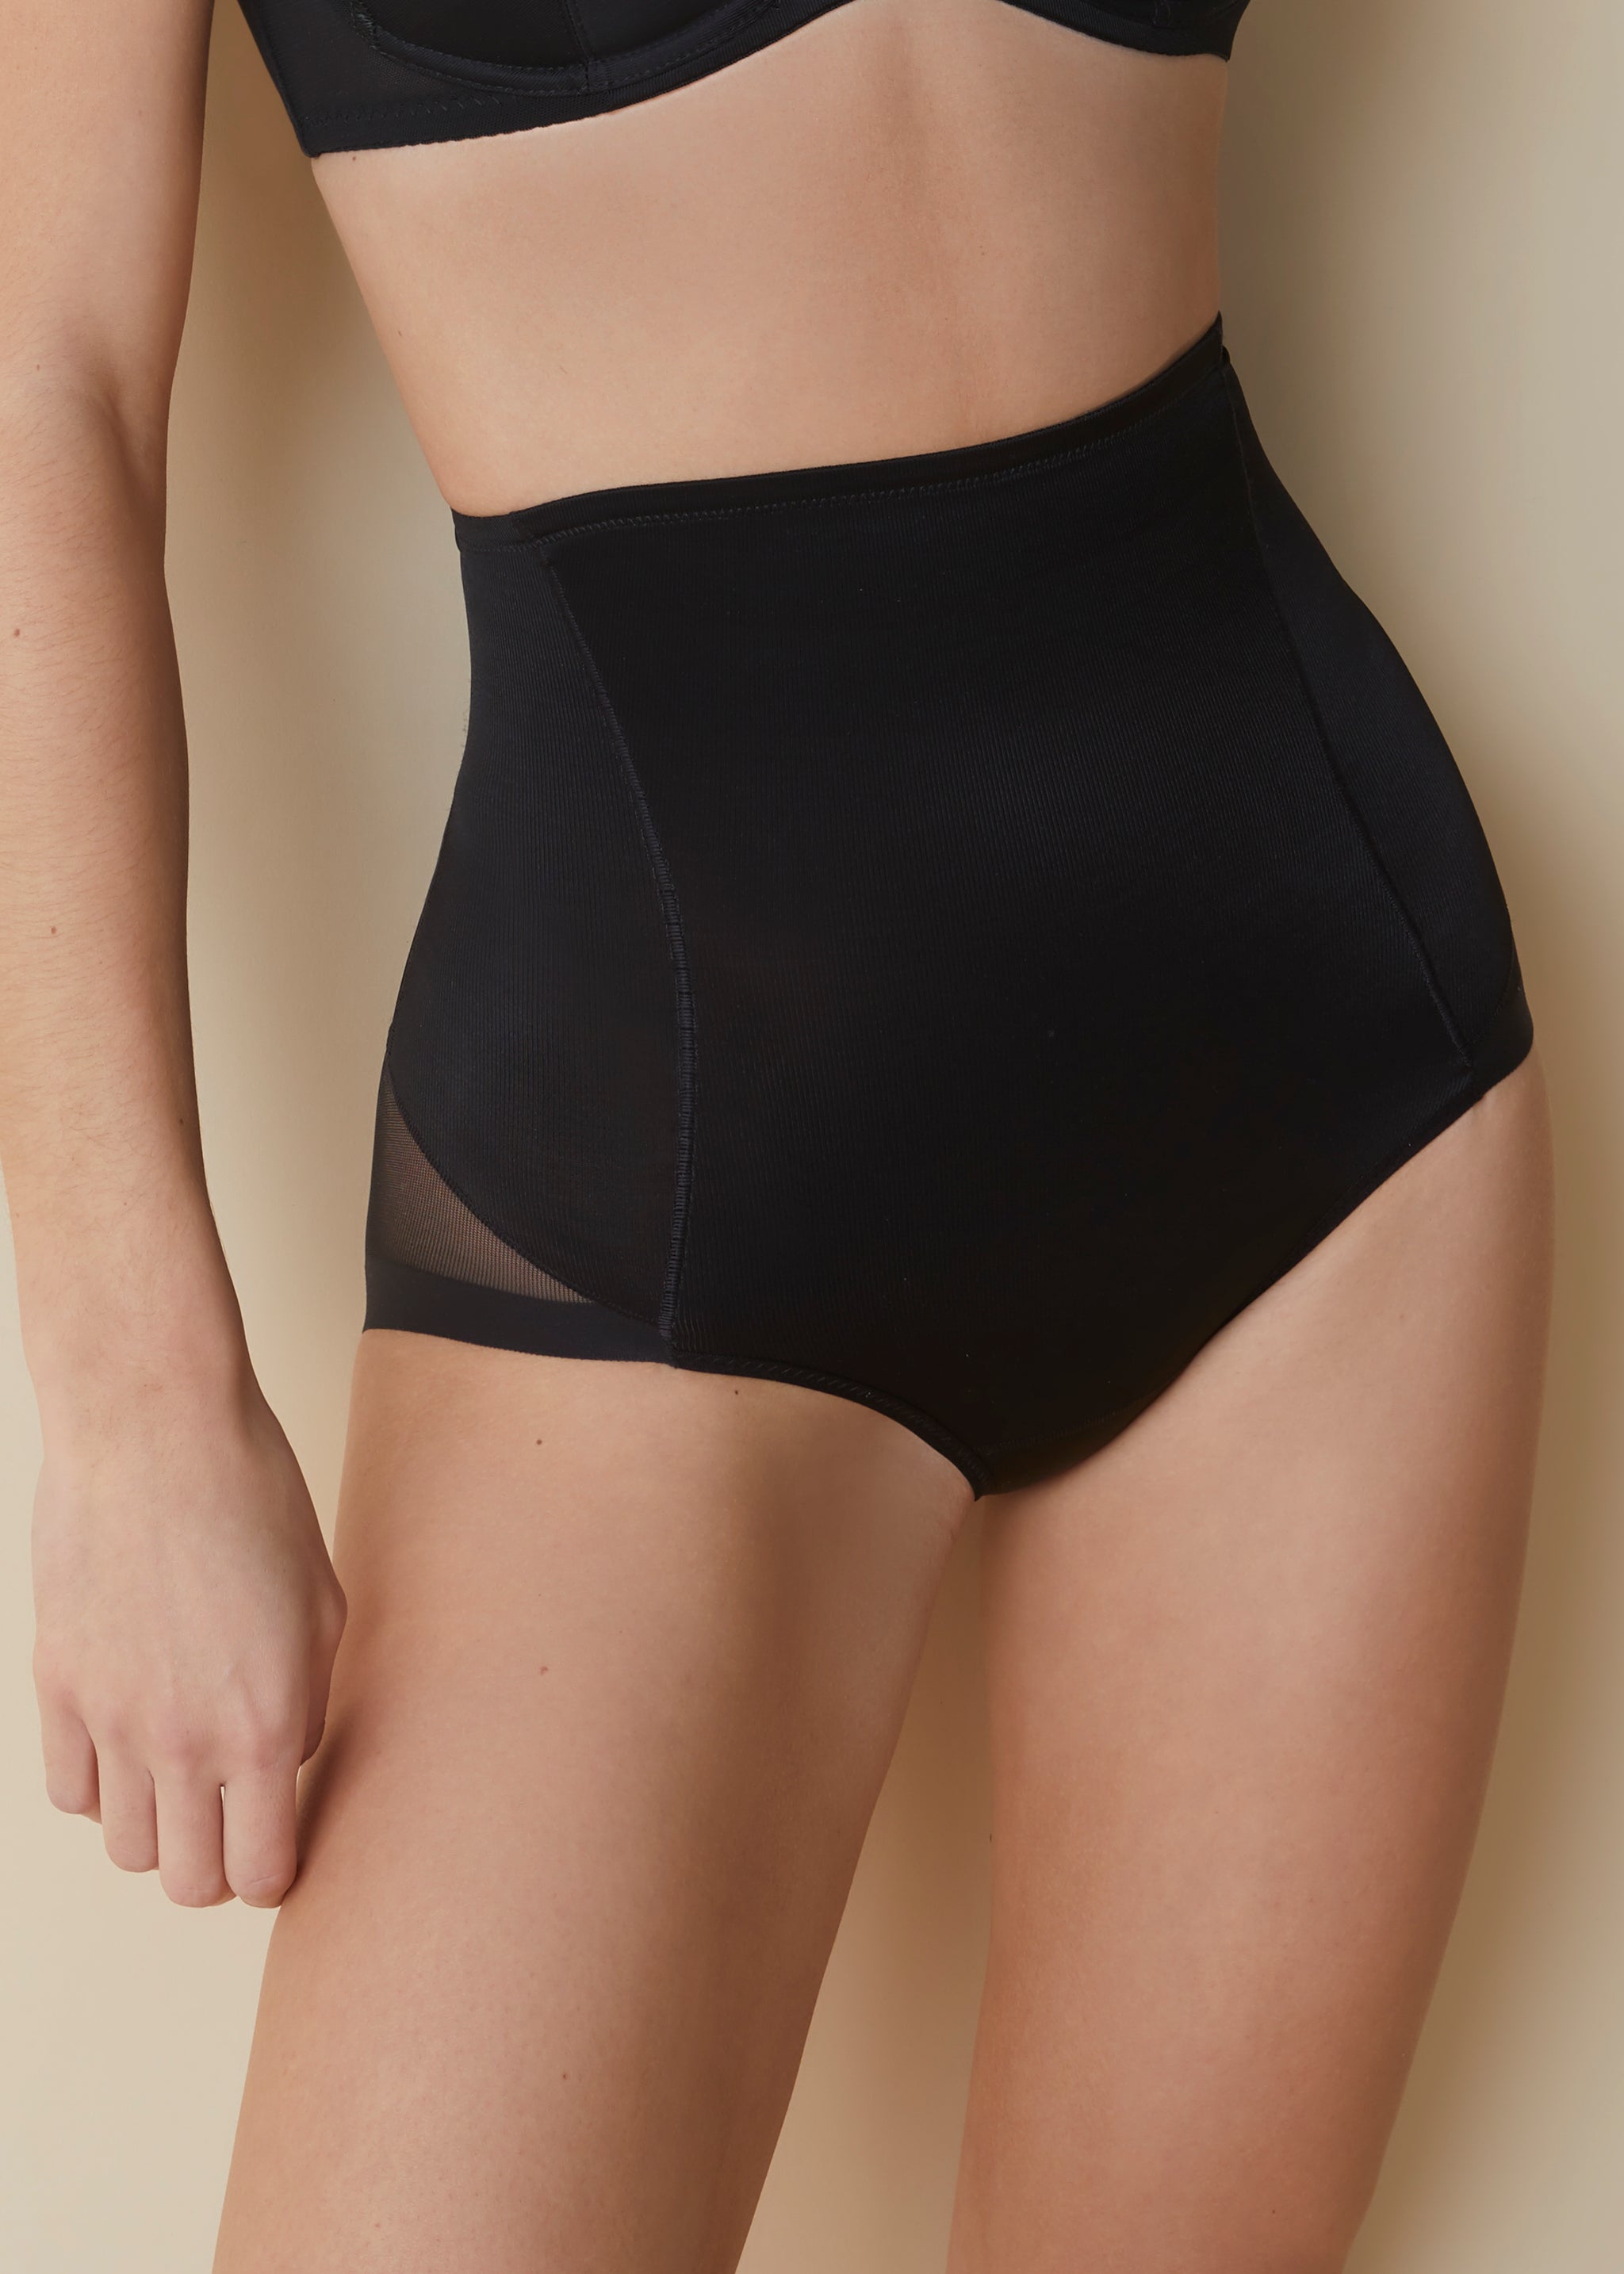 Selene 903 Control: Shaping briefs with transparent sides